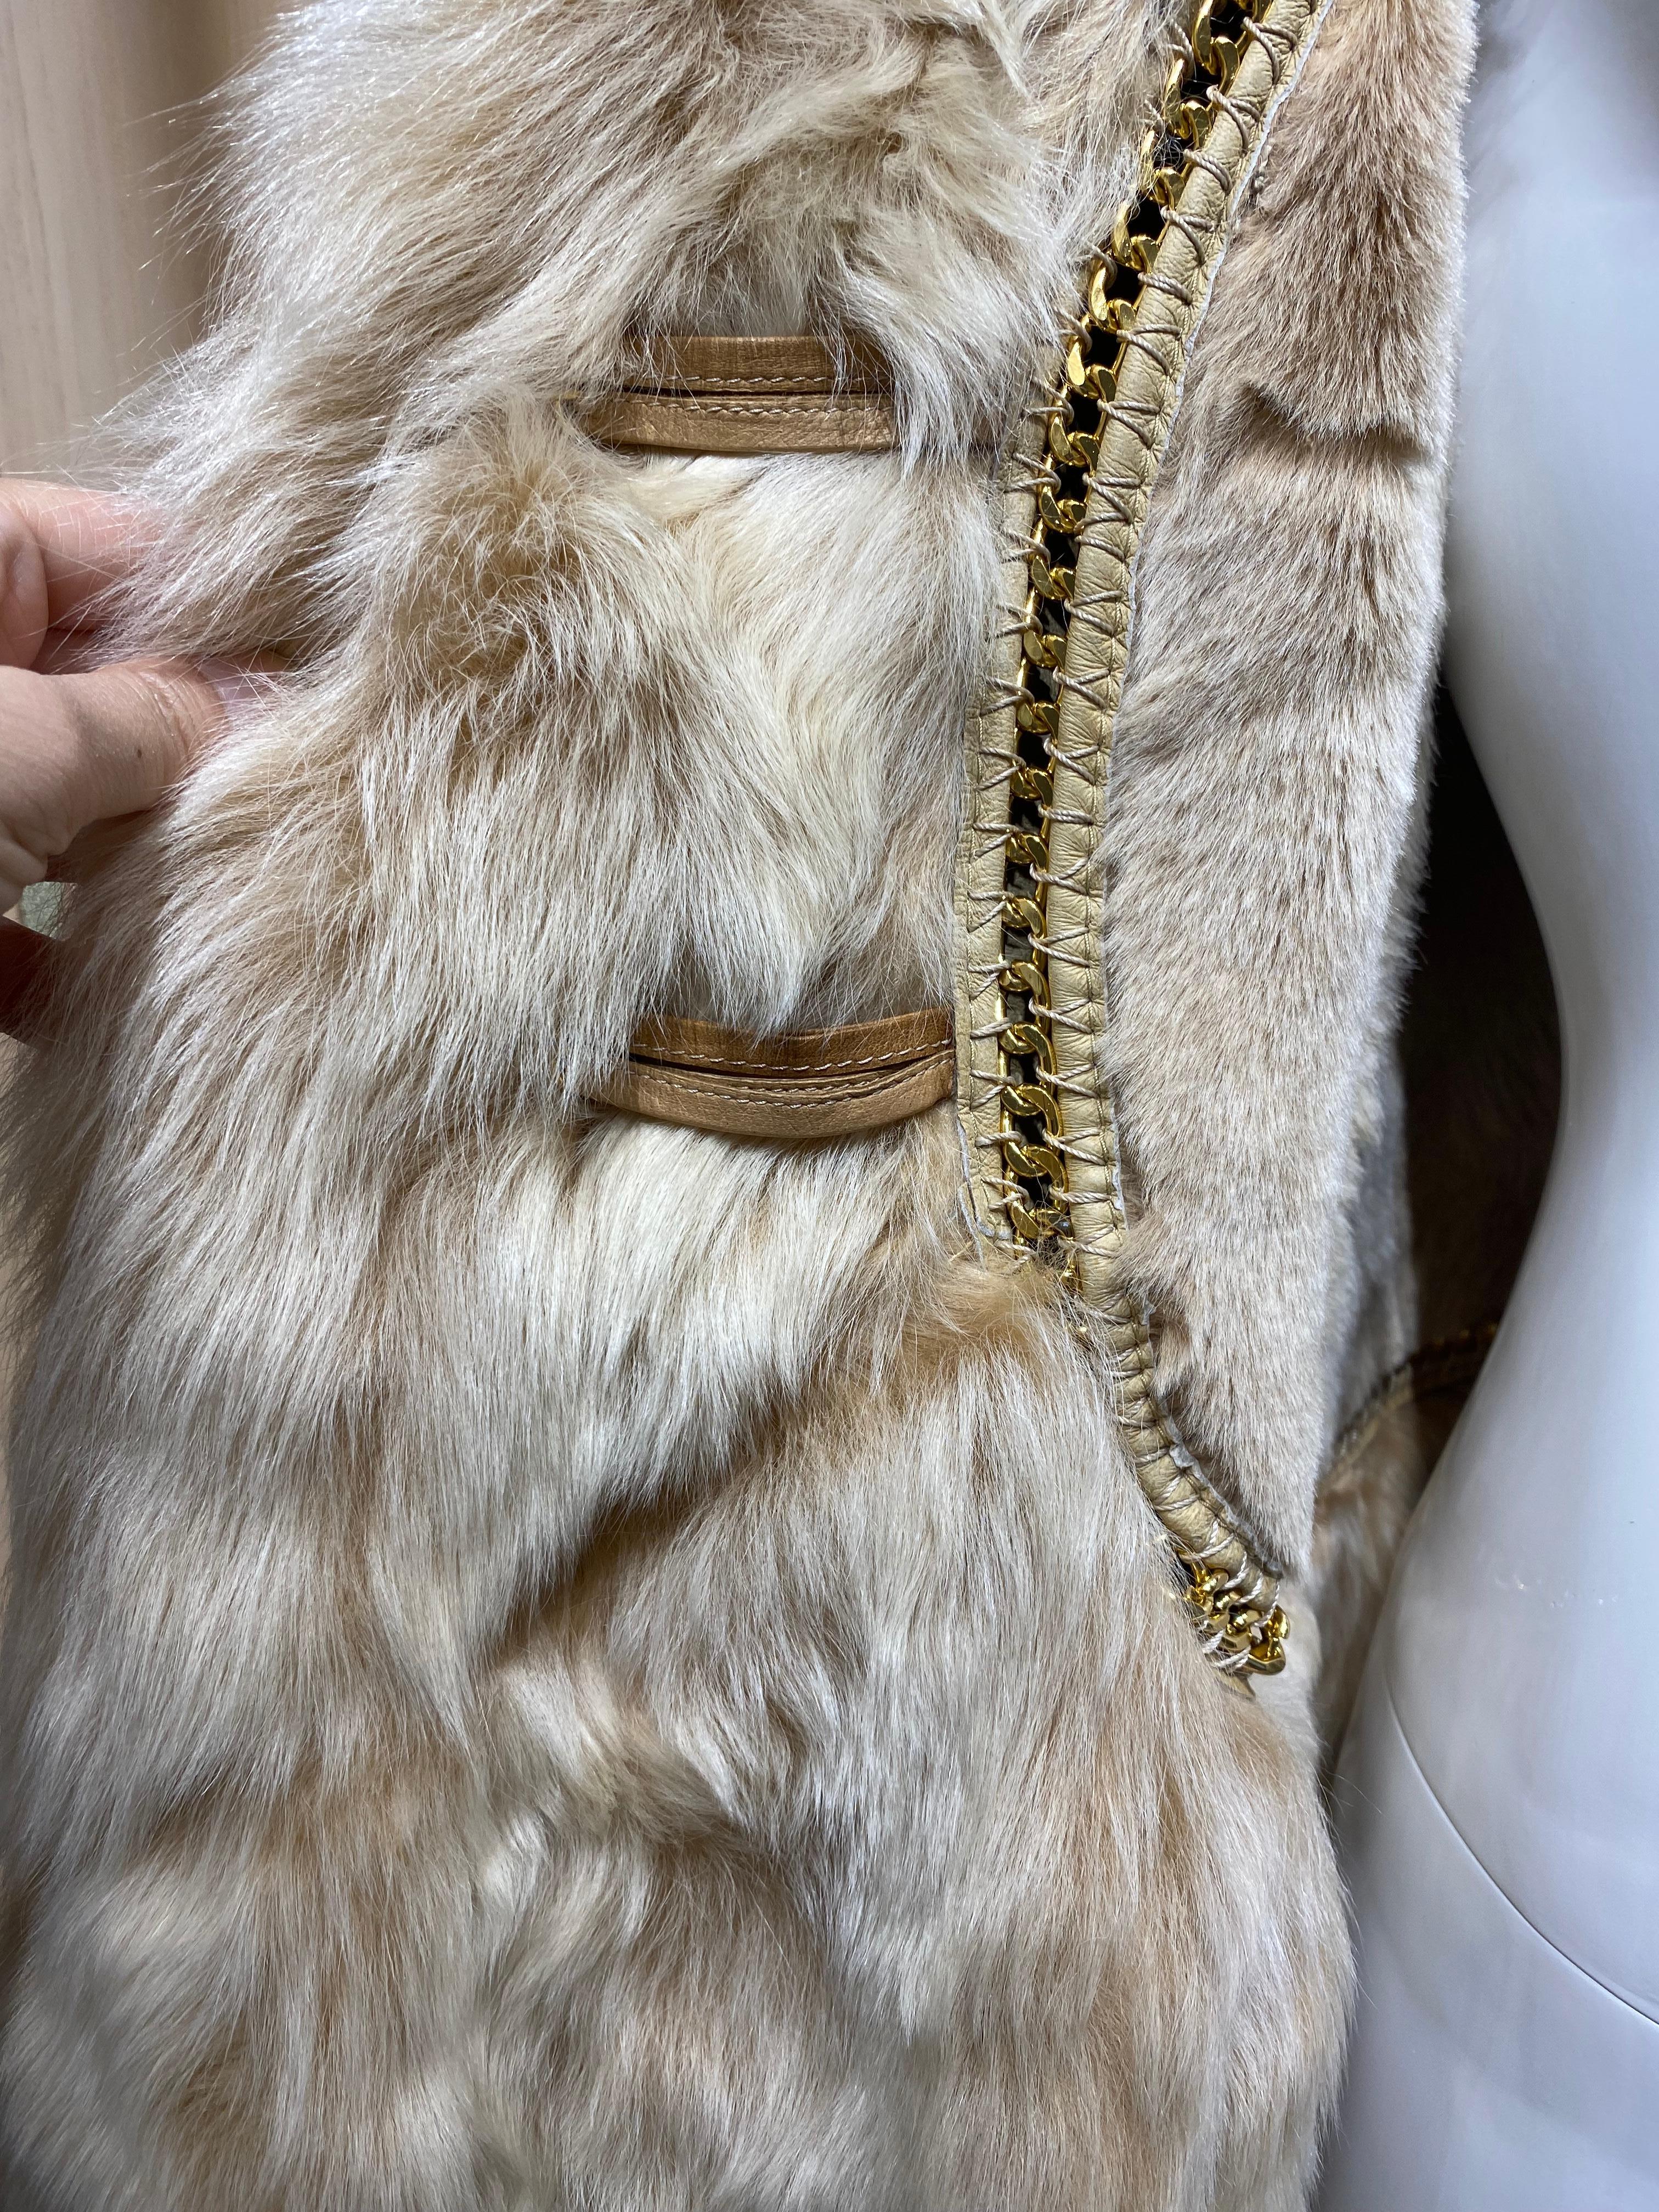 2000s Roberto Cavalli soft suede leather jacket lined in shearling.
Marked Size Medium
Measurement: Shoulder 14.5  / Bust 36”.  / Waist. 34”. / Hip 50” / Sleeve length:29” / 
Jacket length 30”